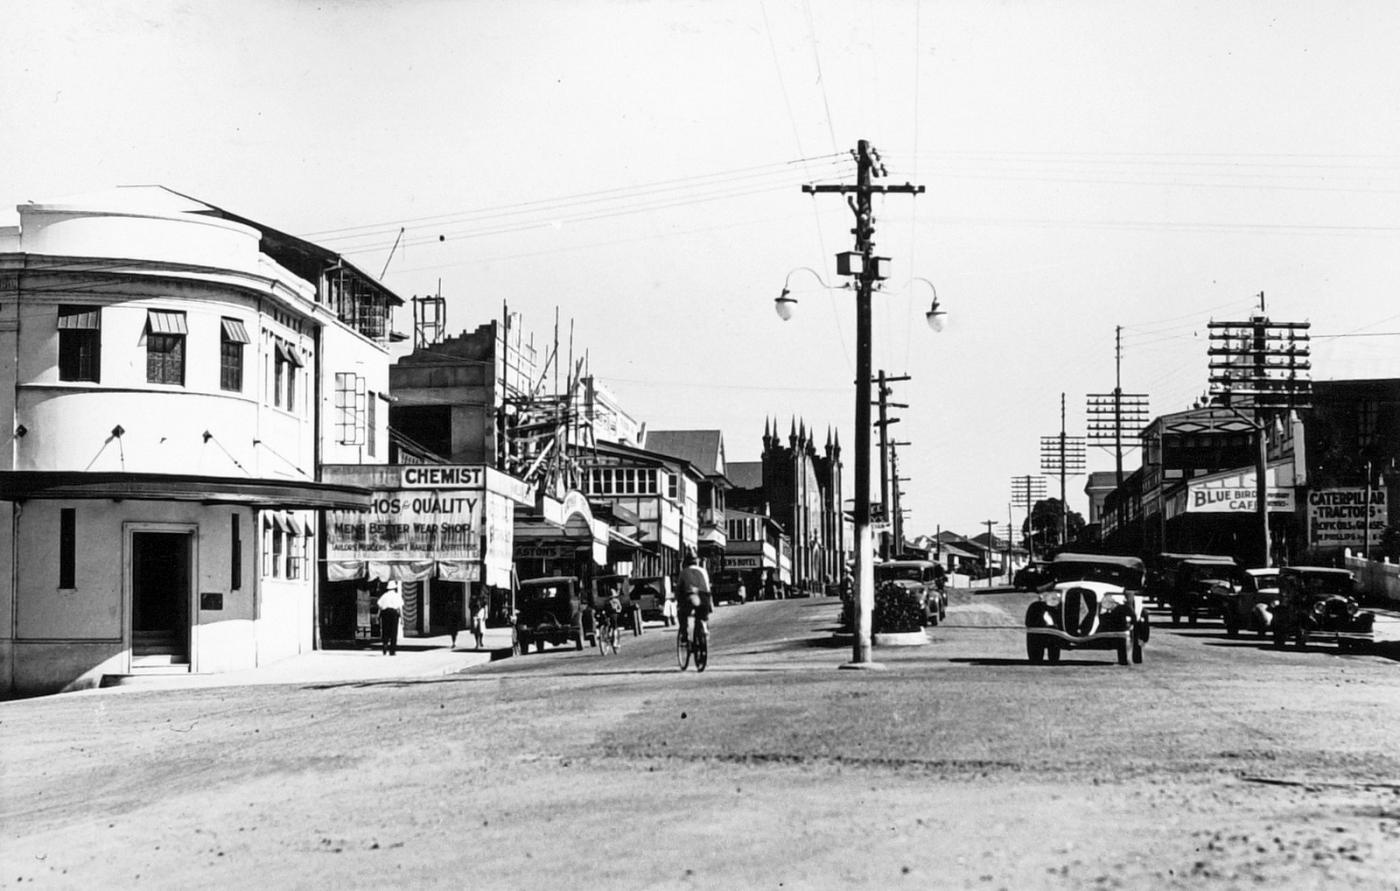 View of a Rankin Street, showing some older style cars, buildings and telegraph poles